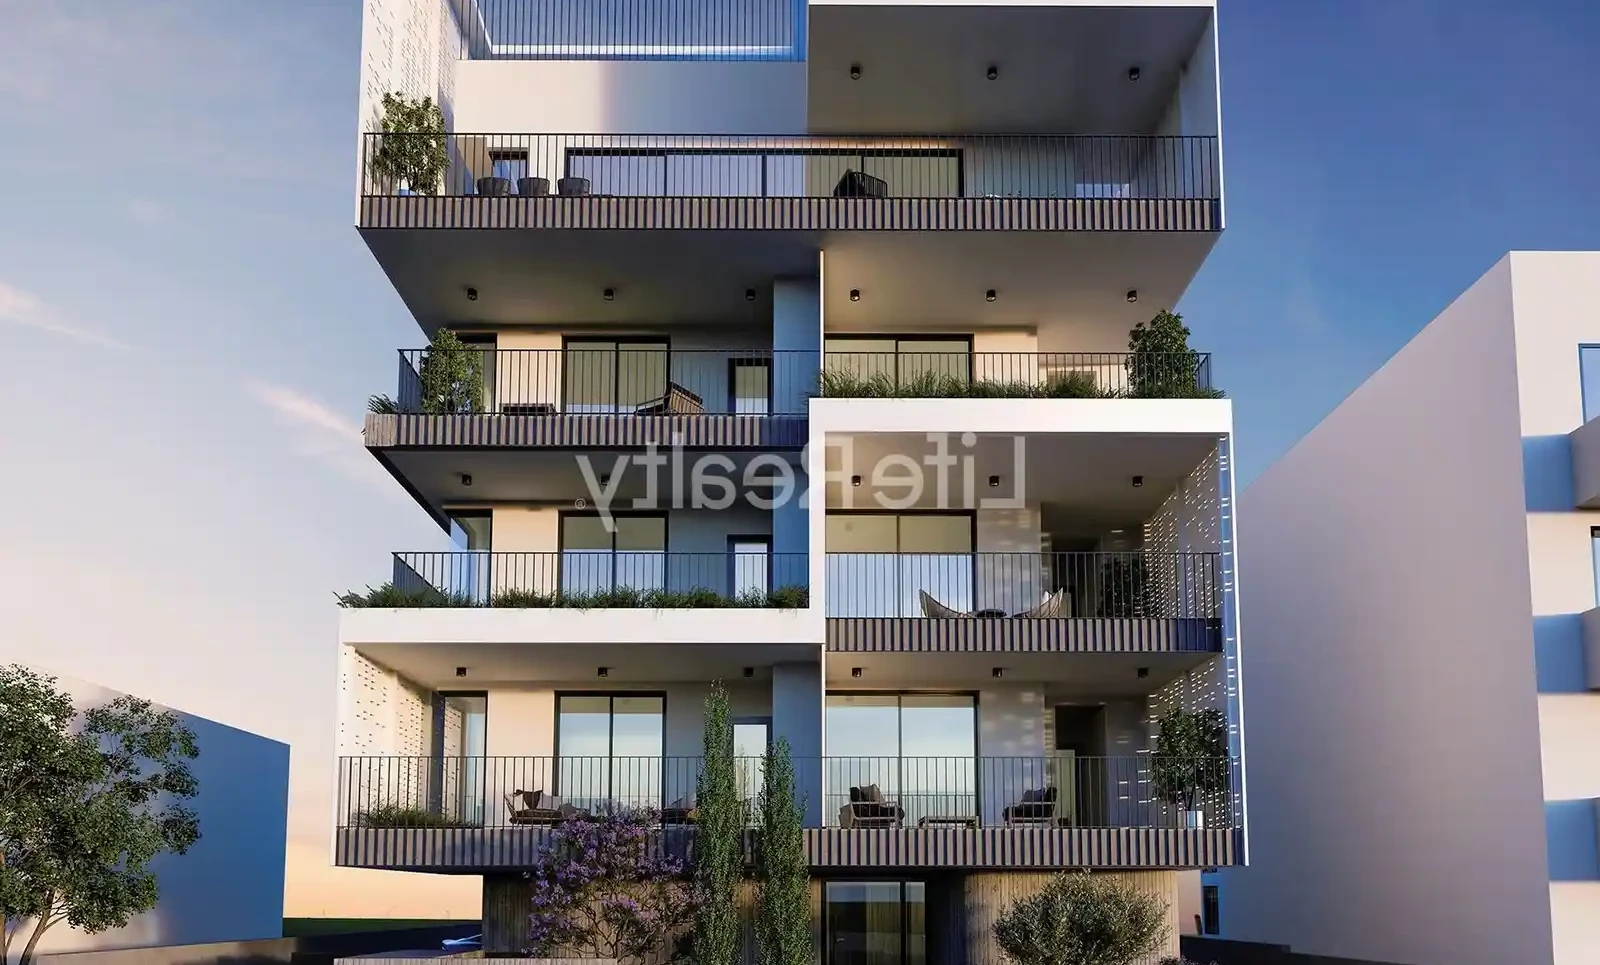 2-bedroom apartment fоr sаle €325.000, image 1